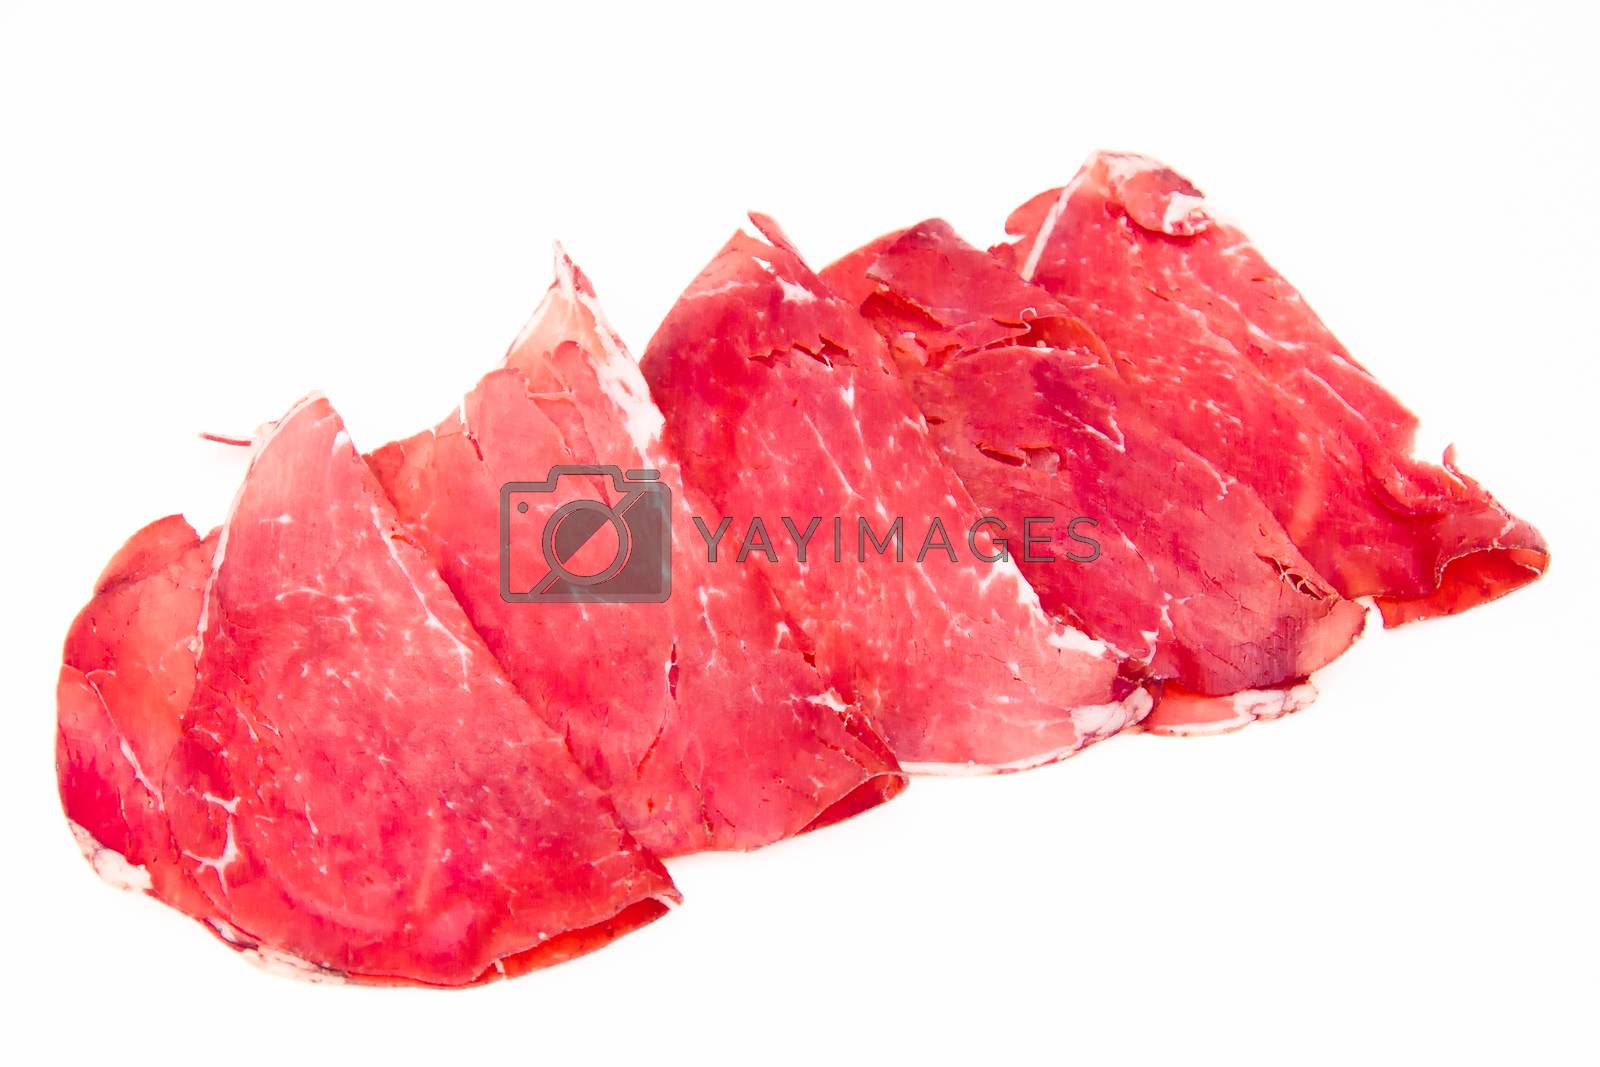 Royalty free image of Bresaola by spafra